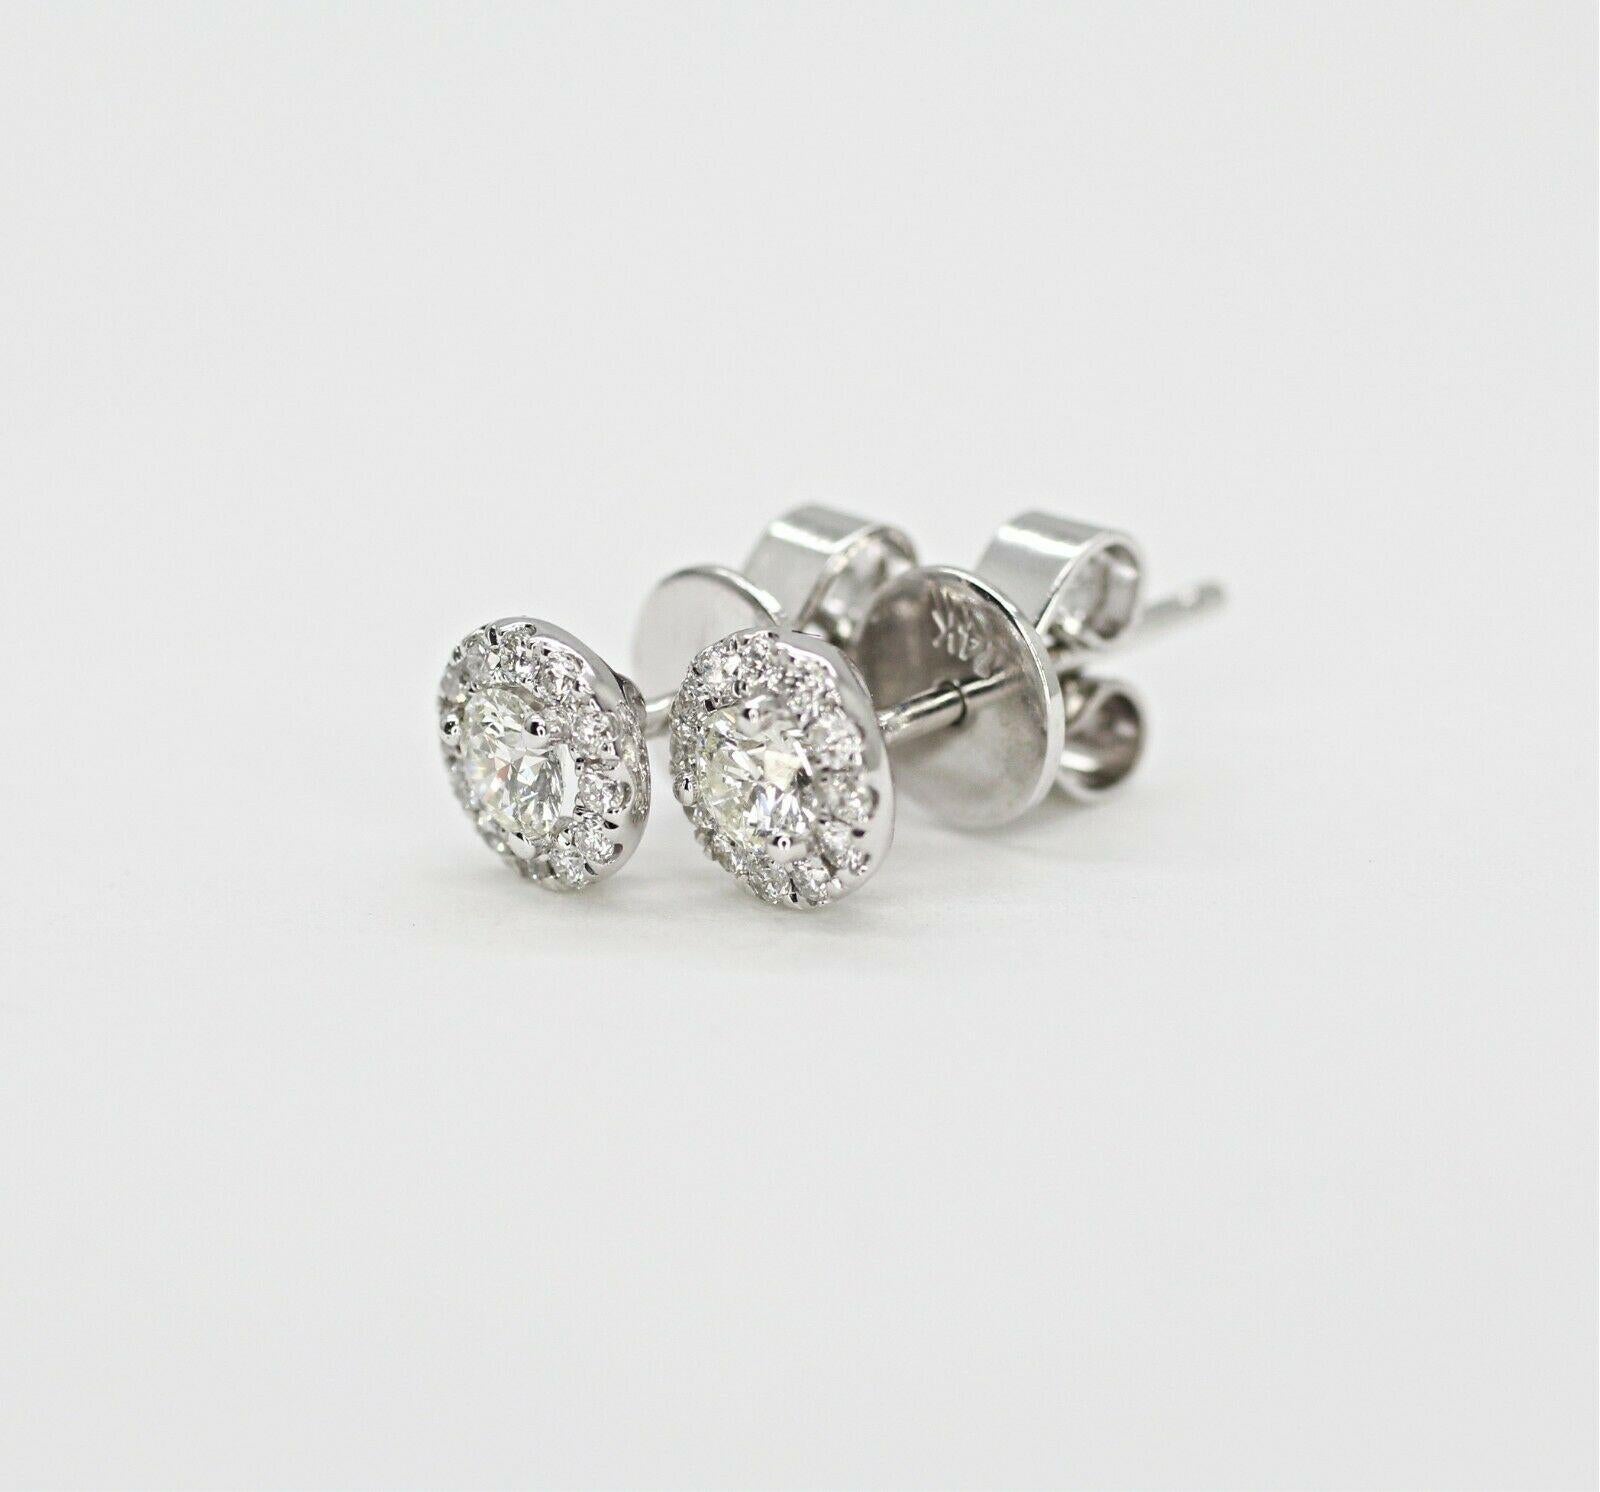  14k white gold diamond halo earrings containing, 
Specifications: .63pts. total weight
    main stone: 2 PCS OF ROUND CUT DIAMONDS 0.51 CTW 
    ADDITIONAL: 24 PCS ROUND 0.12 CTW
    color: G-H
    clarity: VS,SI
    brand: custom
    metal: 14k